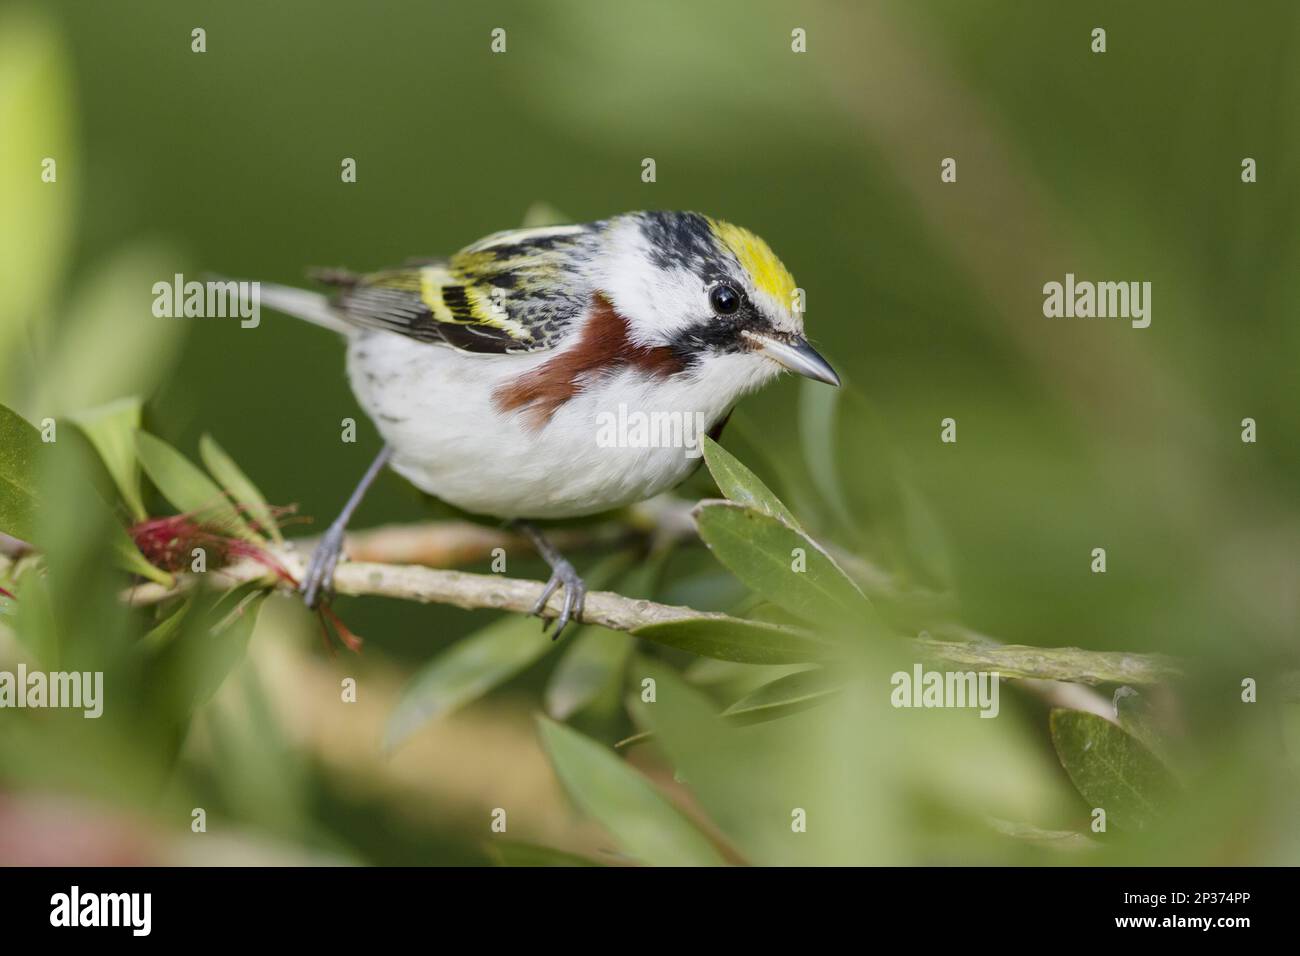 Chestnut-sided Warbler (Dendroica pensylvanica) adult male, perched on twig during migration, Gulf Coast, Texas, U.S.A. Stock Photo